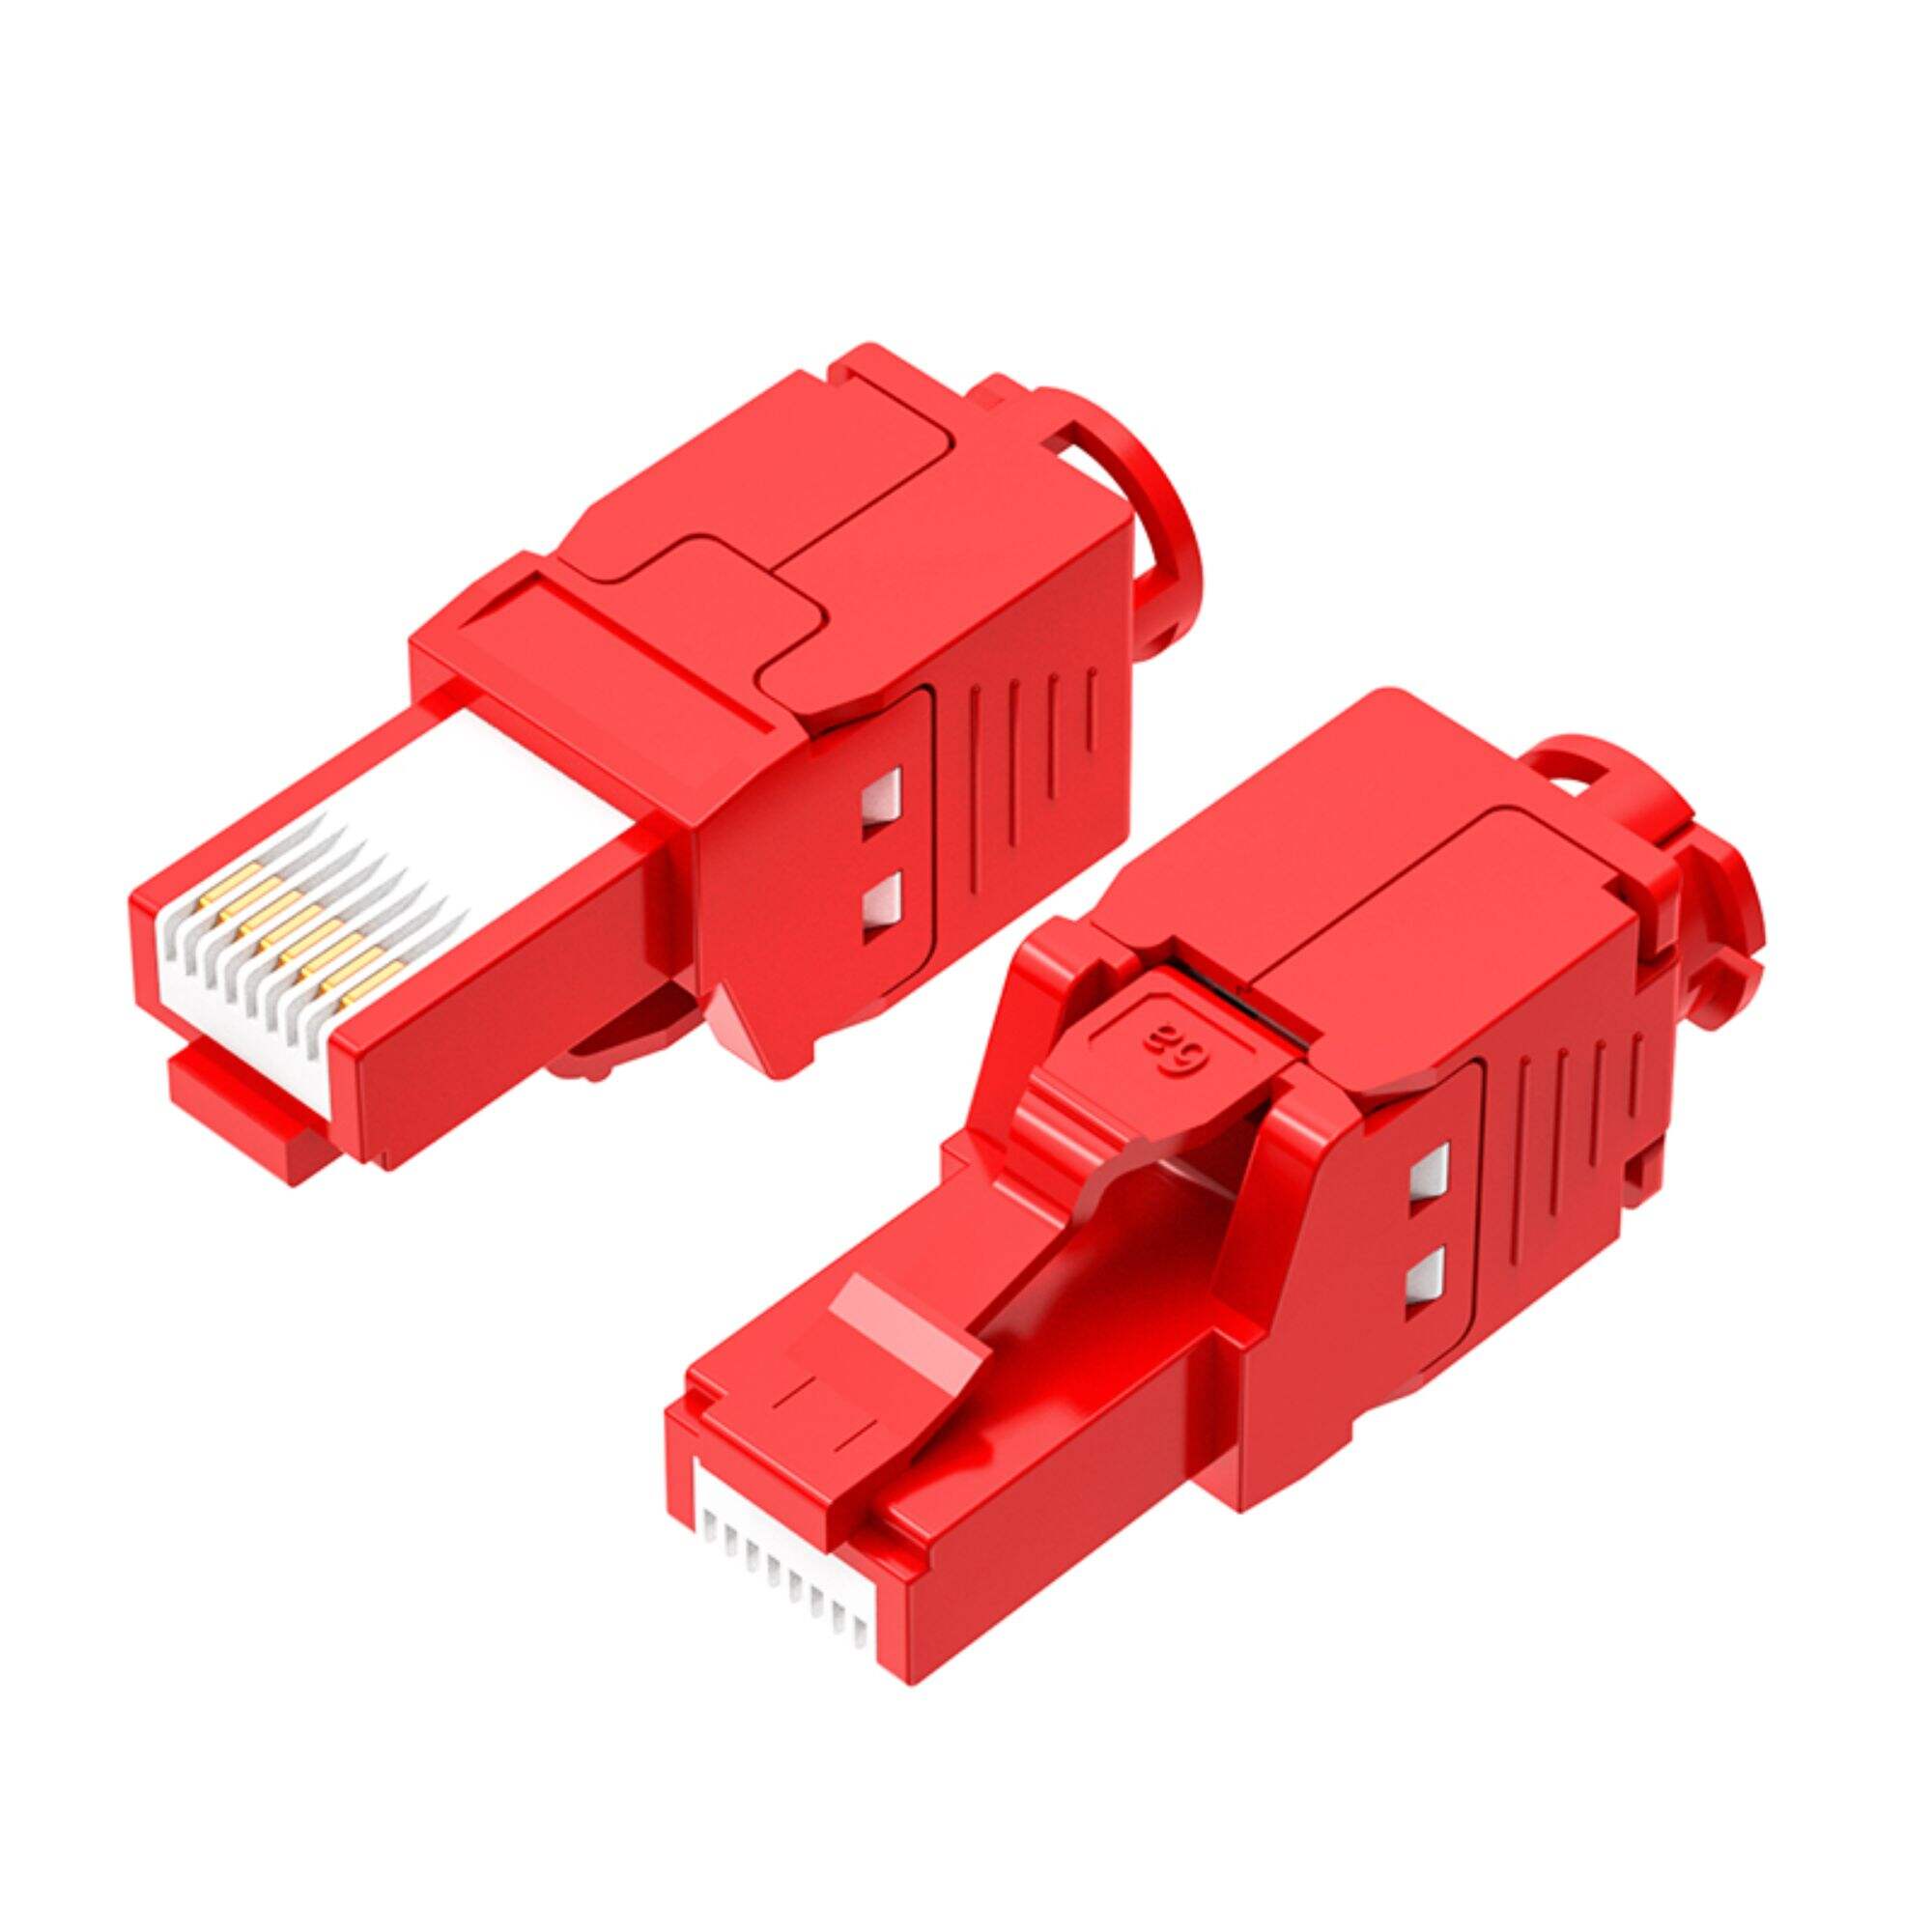 Tool Free RJ45 Connectors for UTP CAT6/CAT5e/CAT5, Punch Down Type Ethernet Cable Male Plugs